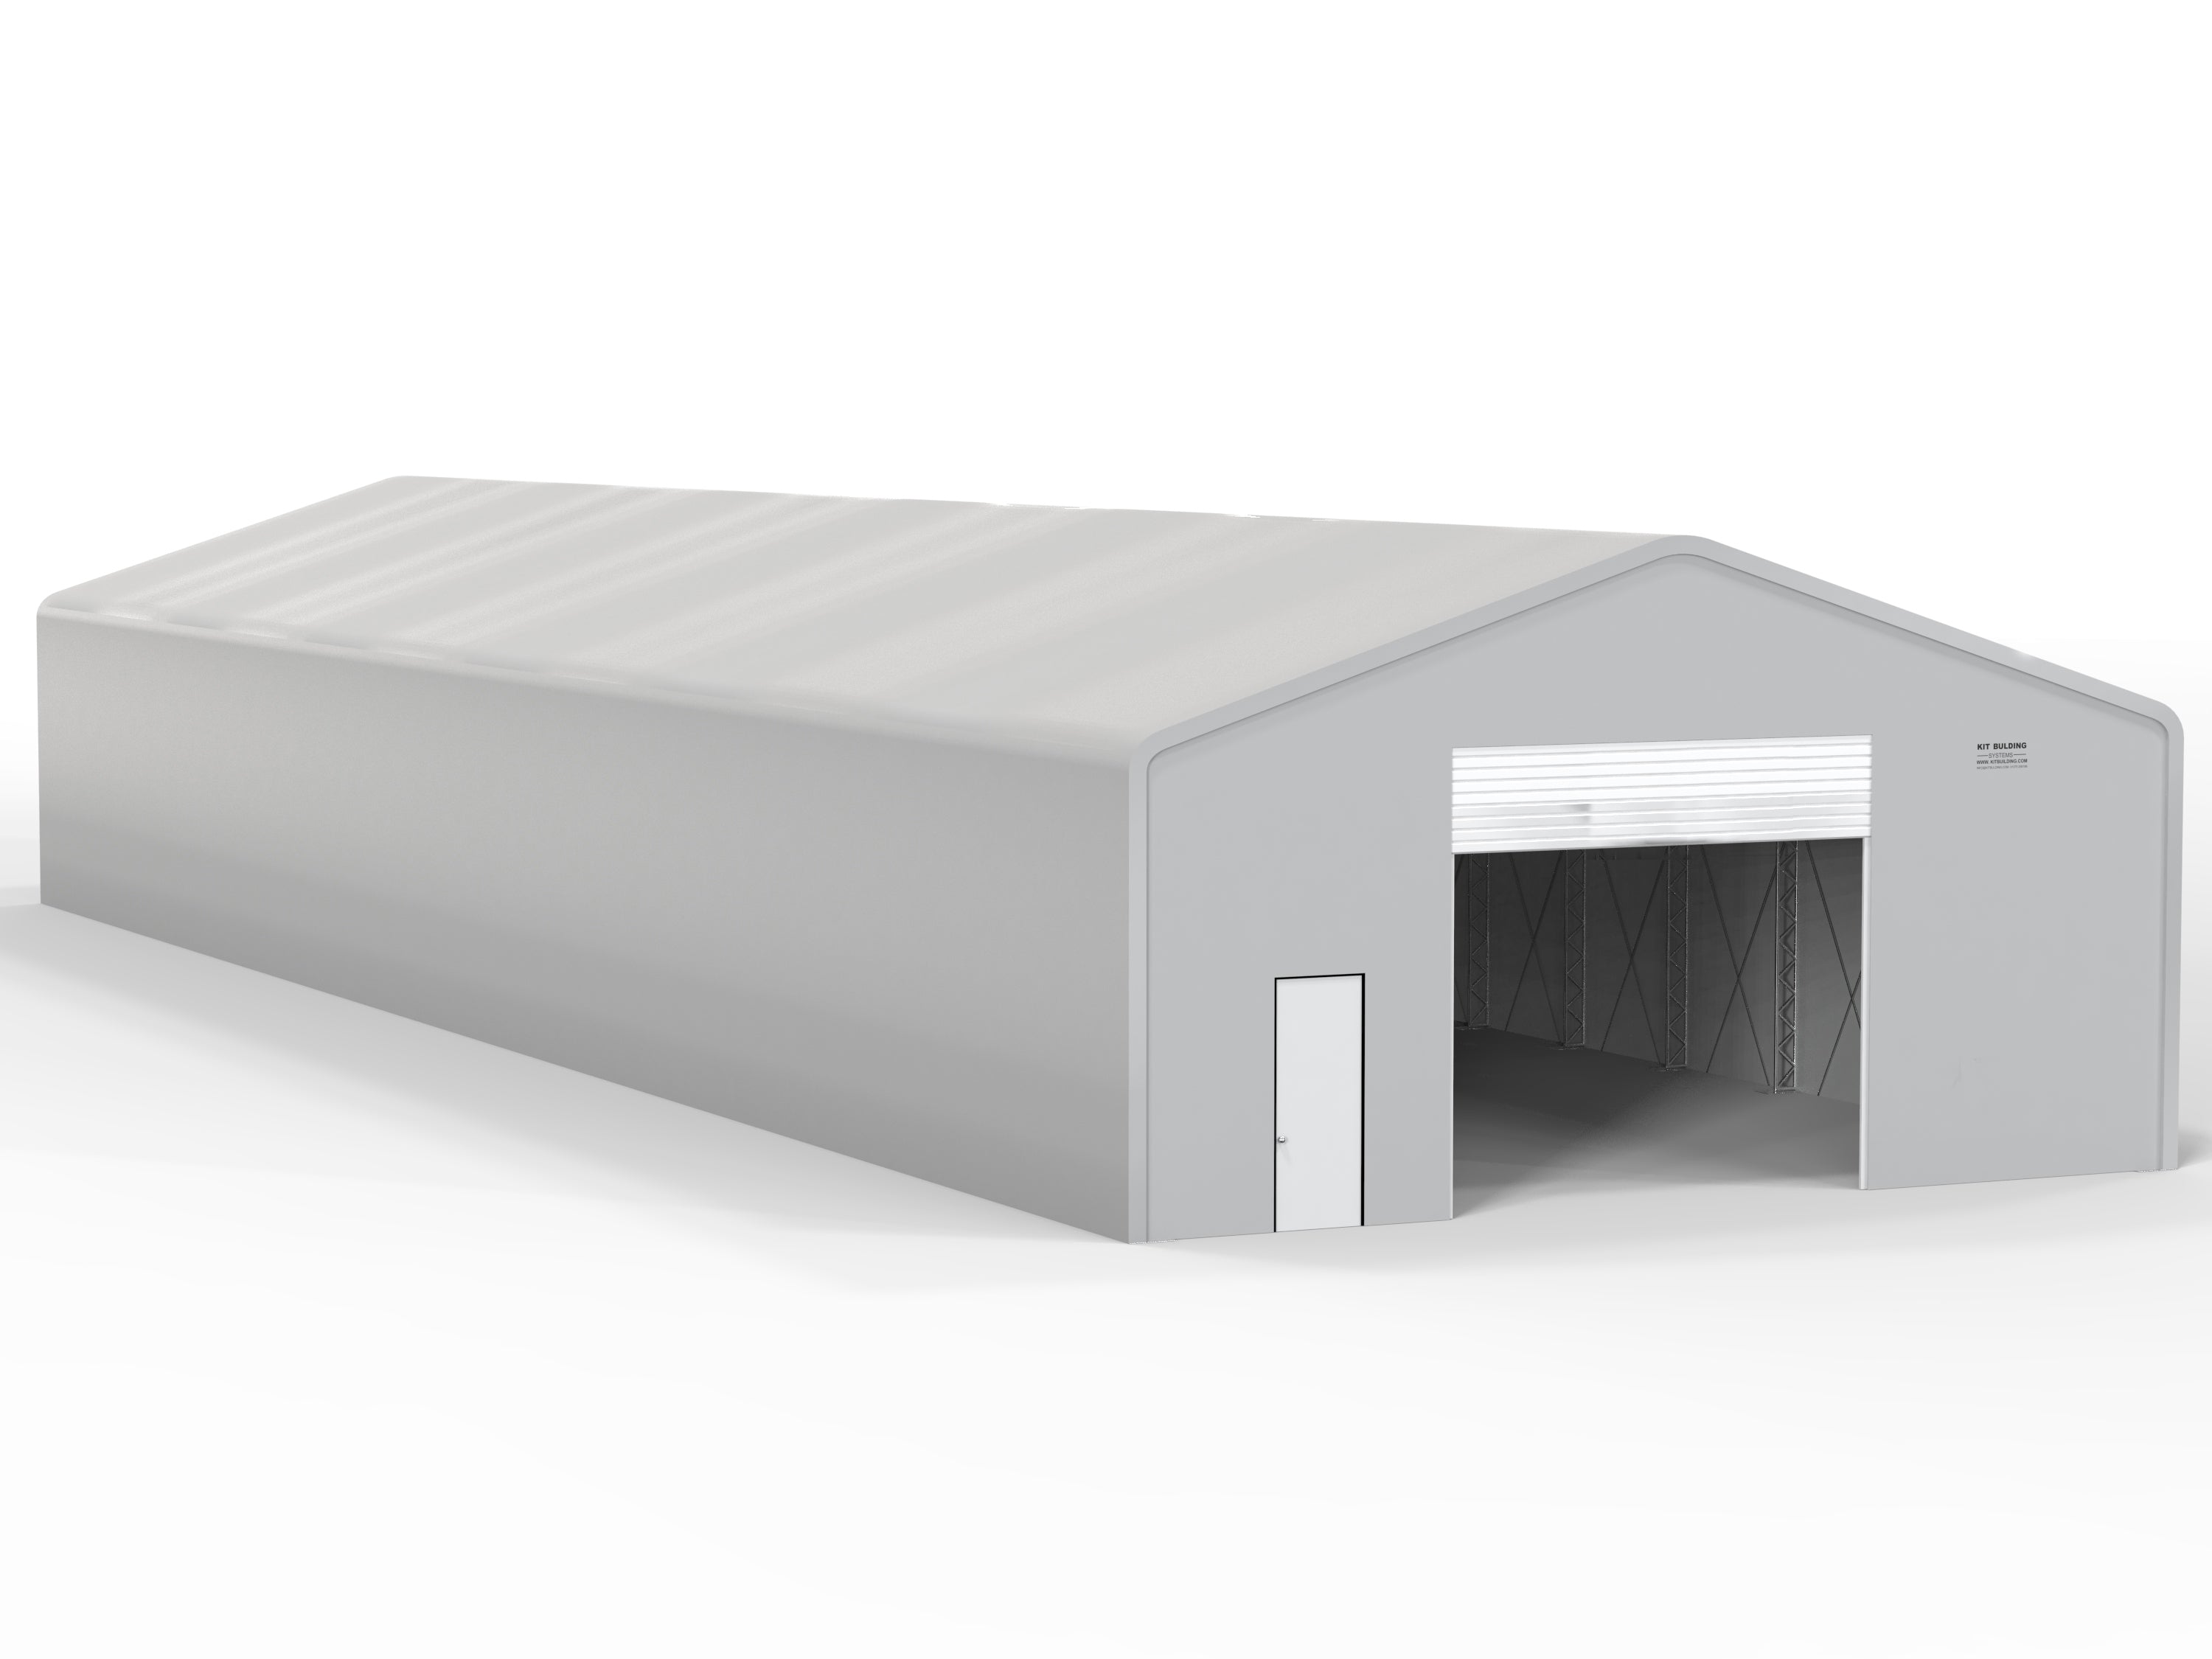 Double Truss PVC temporary storage building - Grey - Automatic roller Shutter